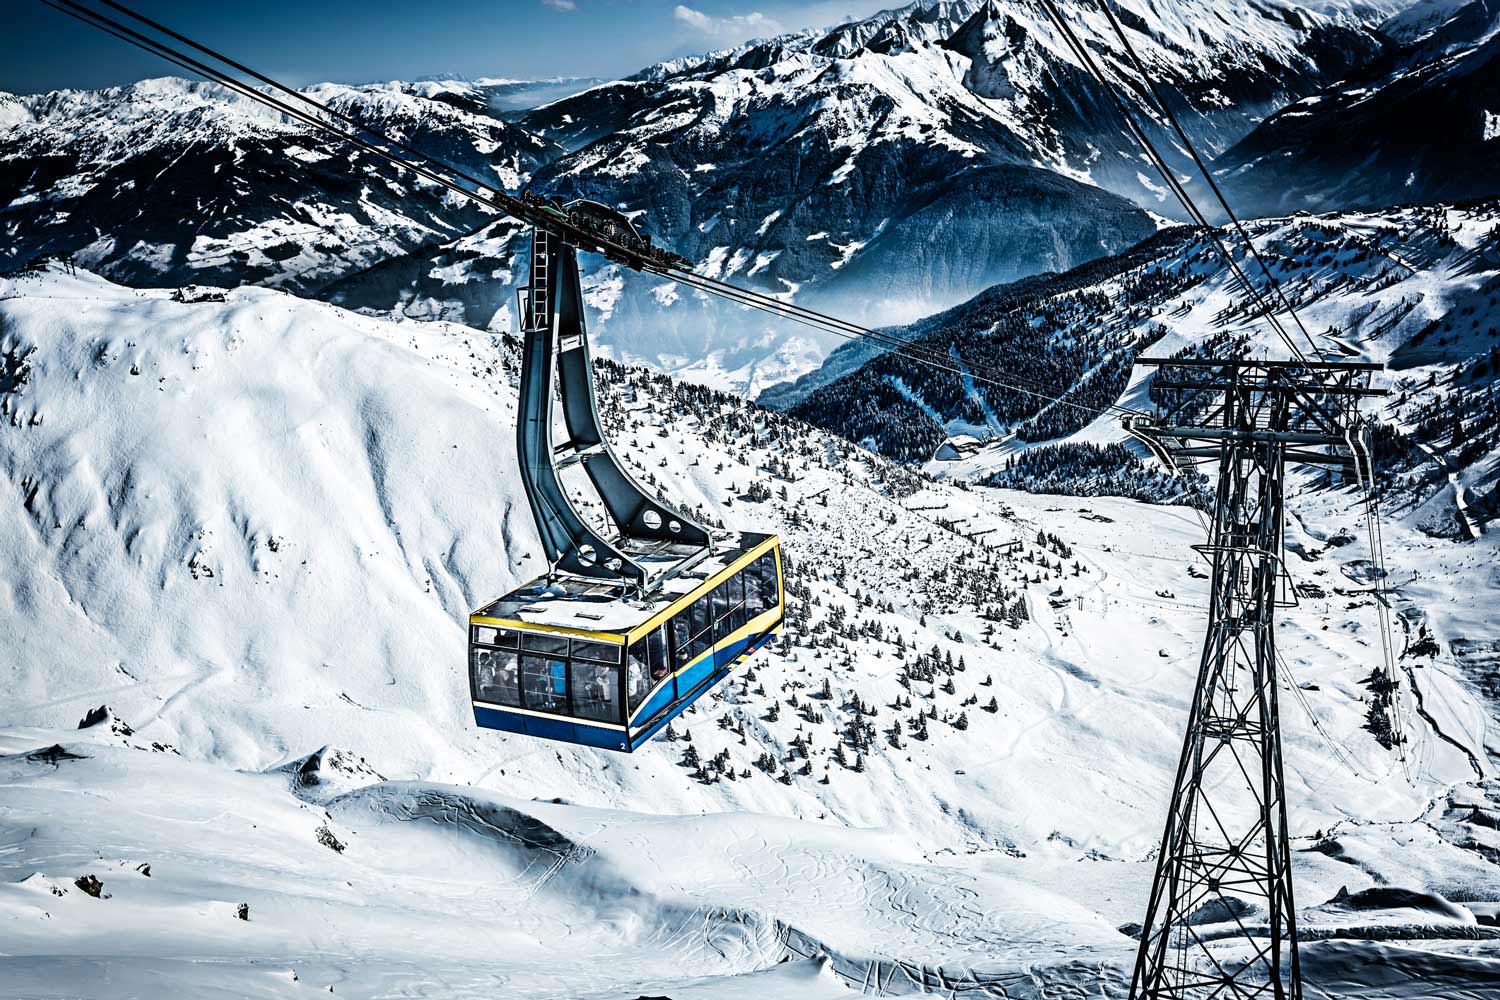 The Ahornbahn is one of the two main gondola's from the village to the slopes - Photo: Getty